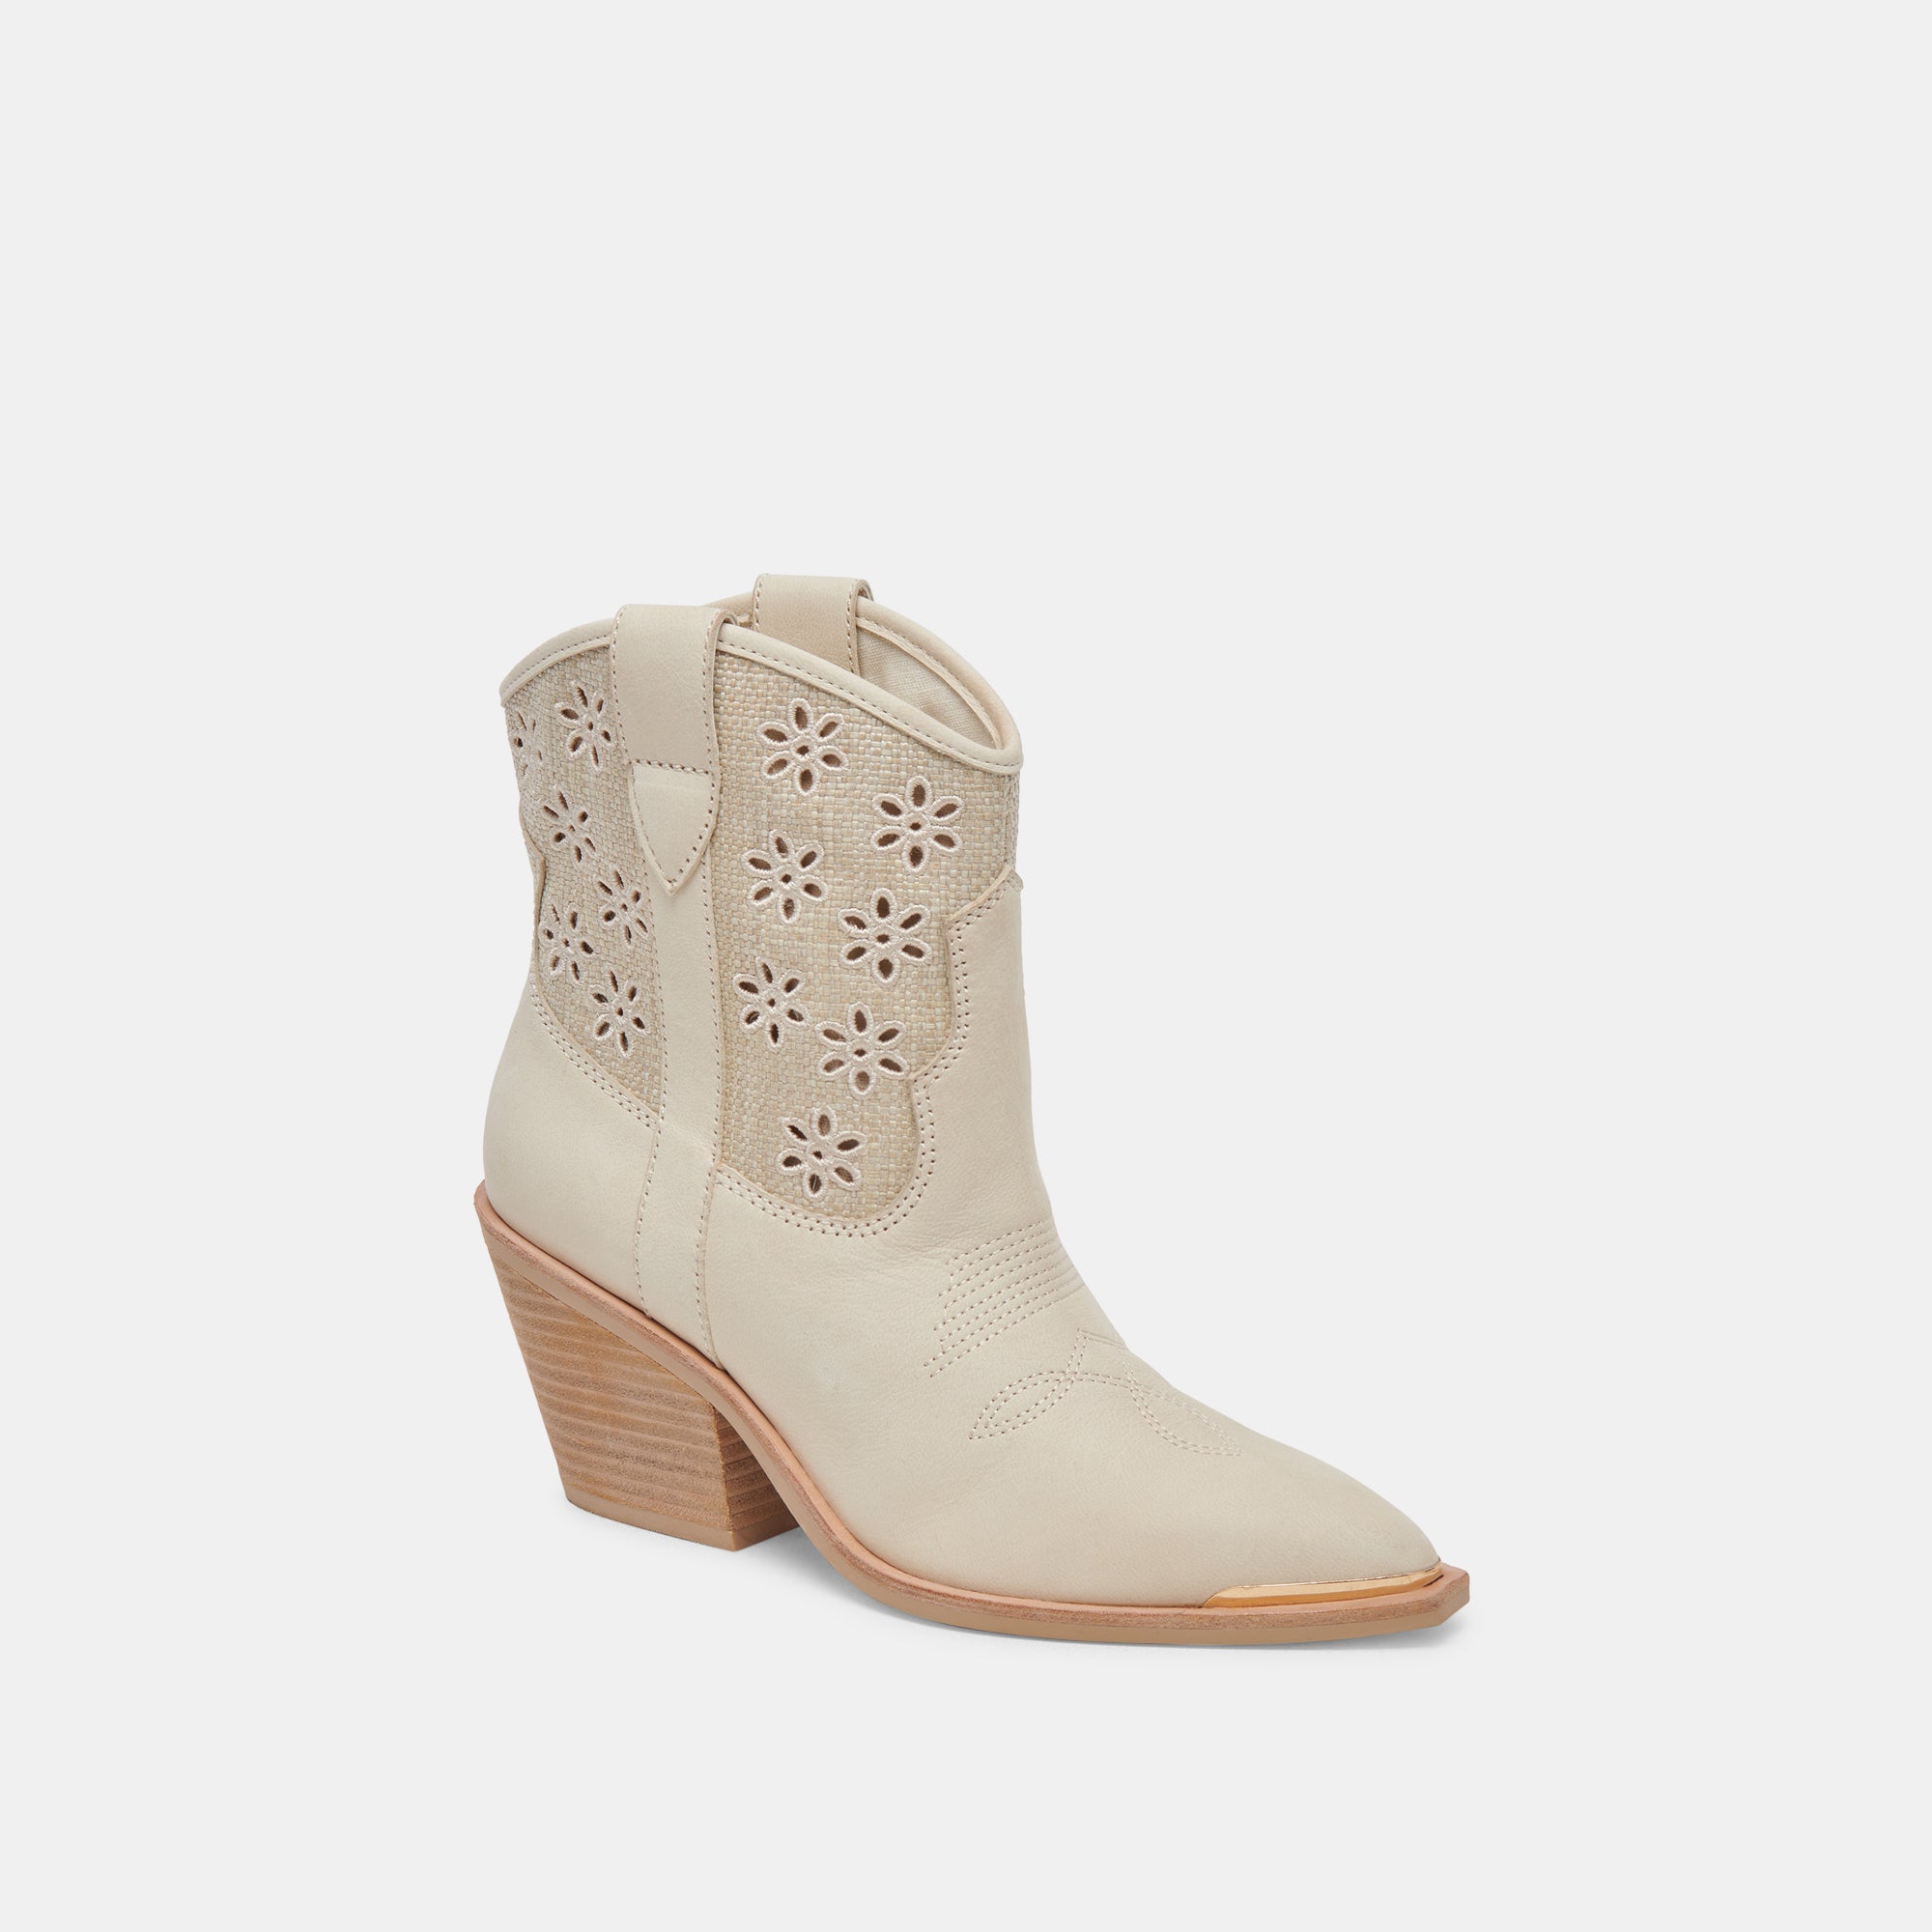 NASHE BOOTIES OATMEAL FLORAL EYELET – Dolce Vita